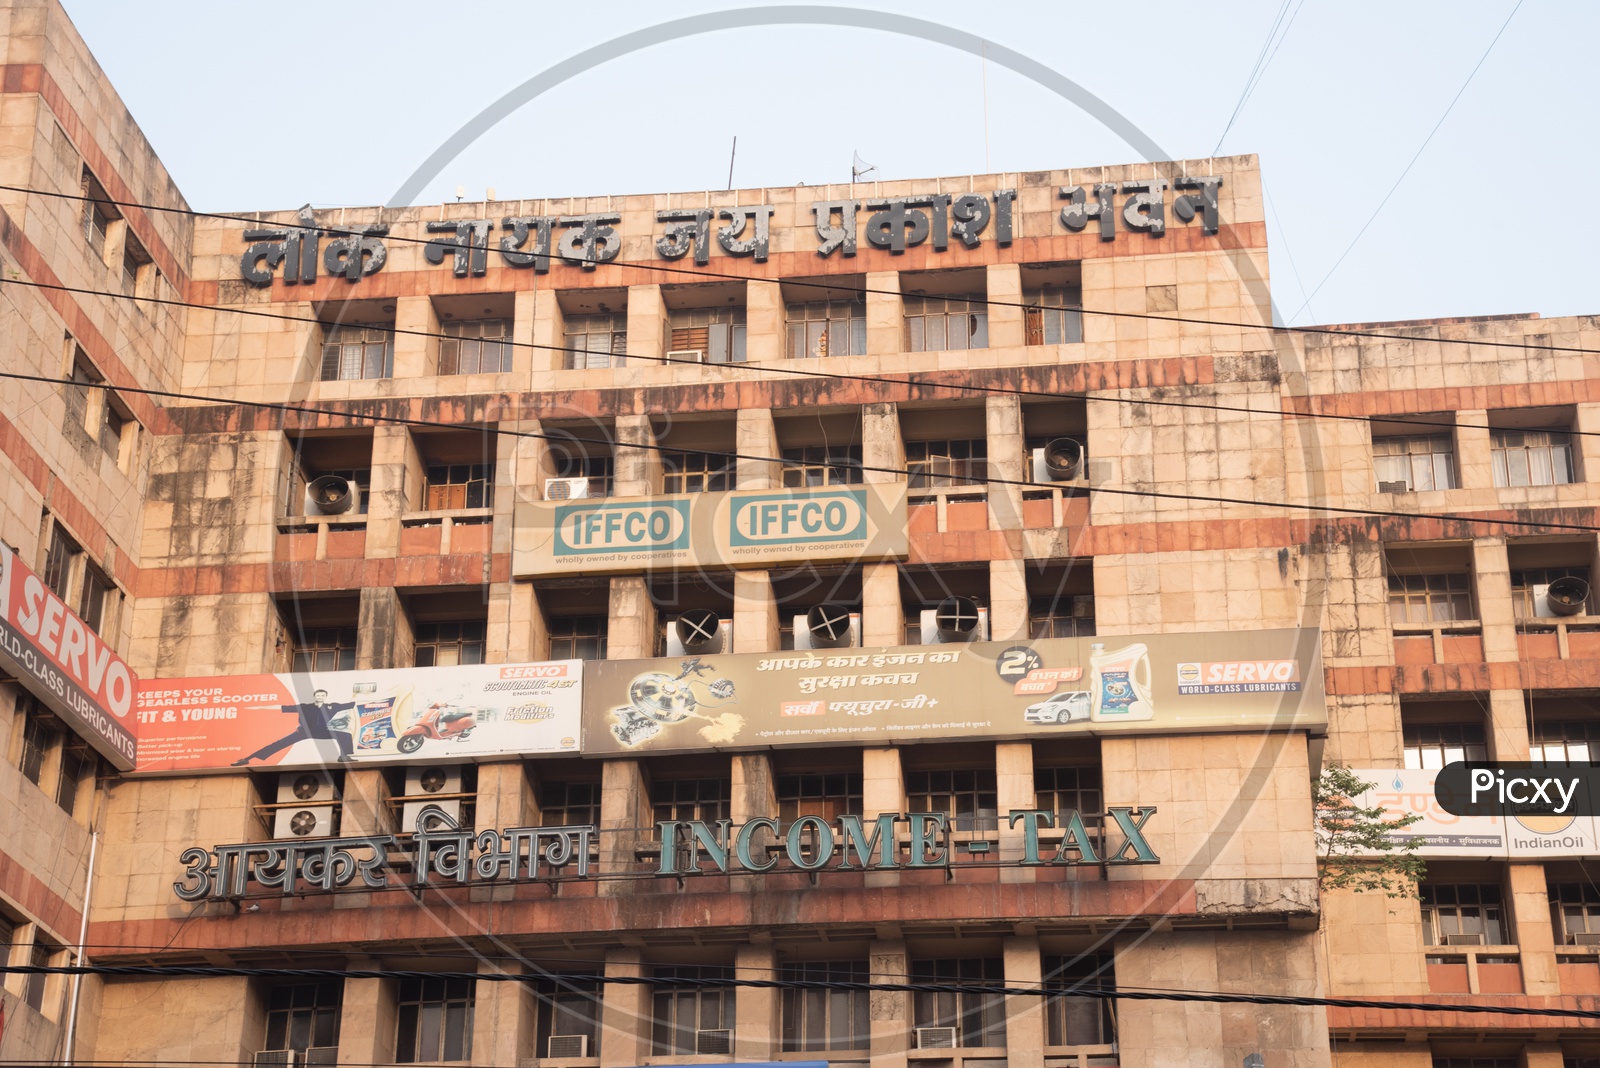 image-of-income-tax-office-building-in-patna-al619902-picxy